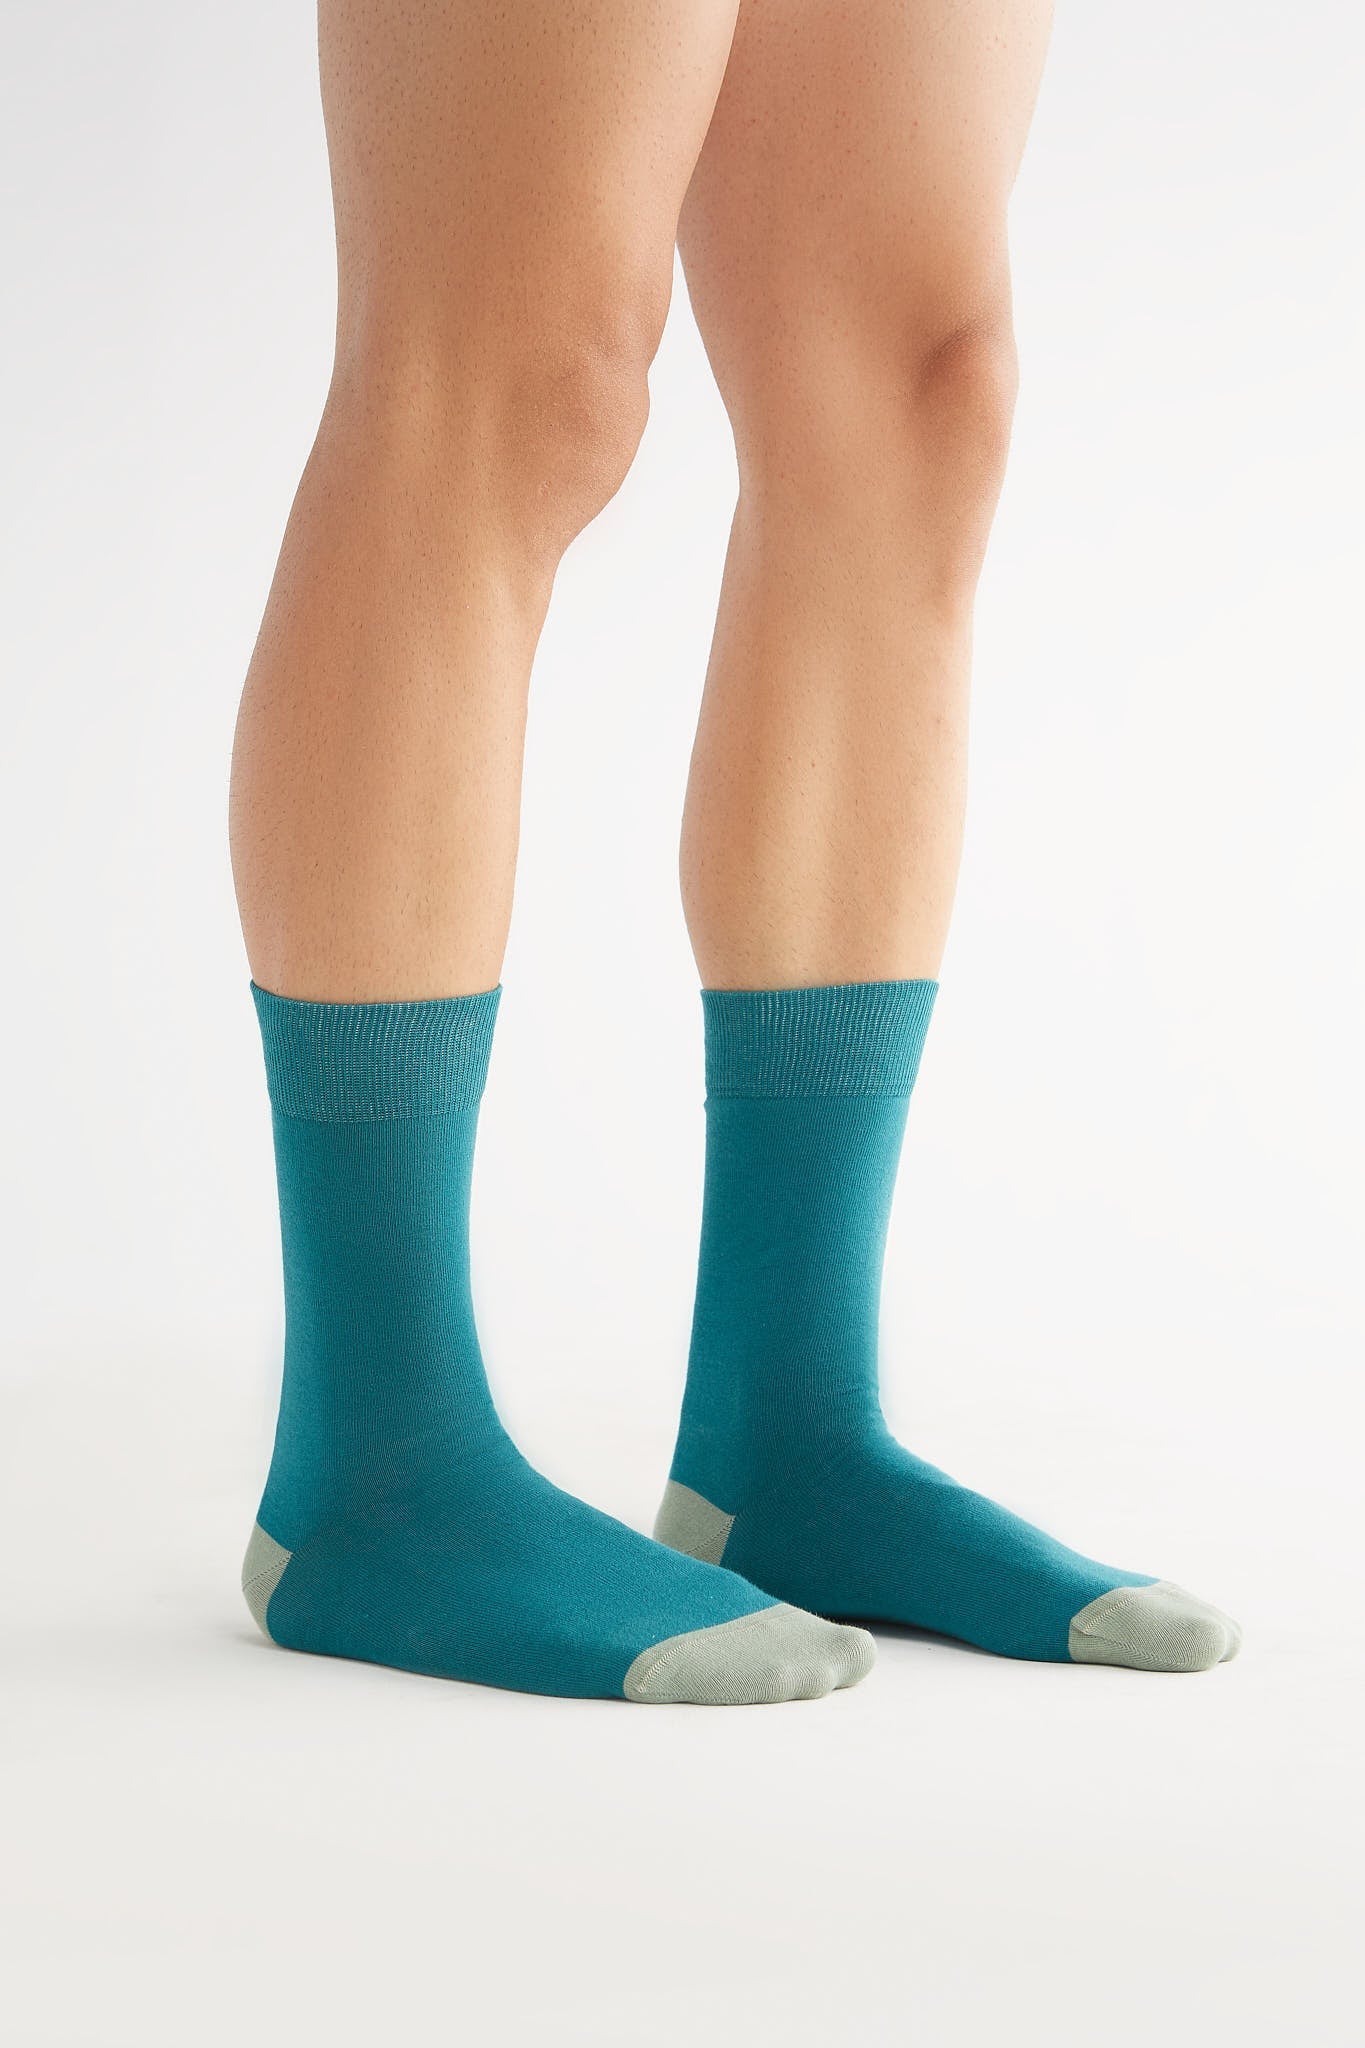 2316 | Stockings, teal/frost green